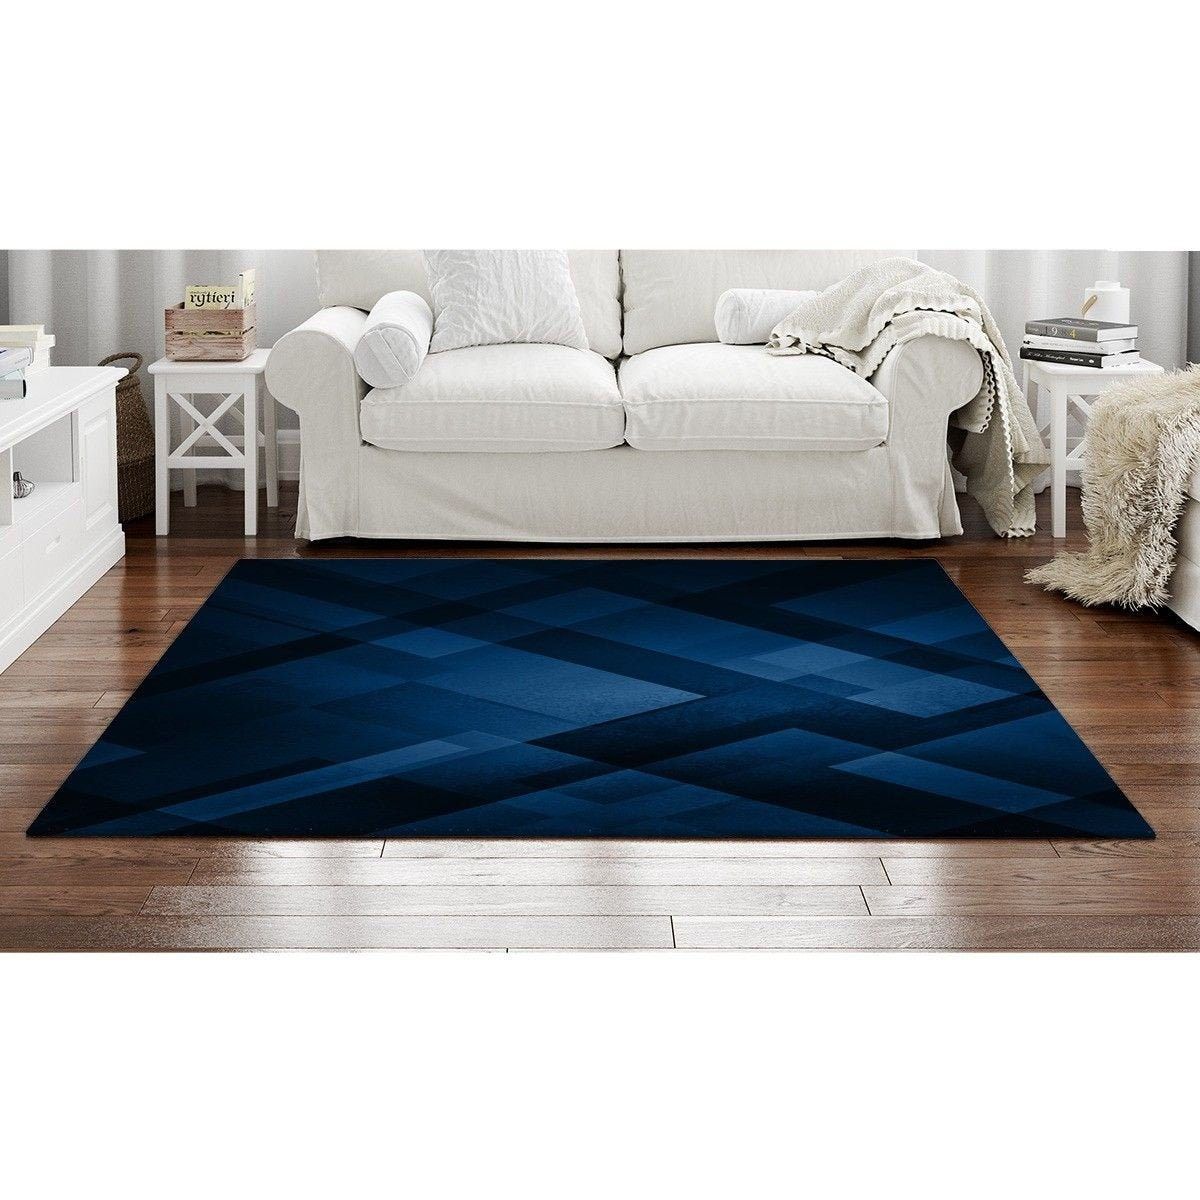 Blue Rugs Blue Area Rug Navy Blue Area Rug Geometric Area Rug – Etsy  Australia Pertaining To Navy Blue Rugs (View 11 of 15)